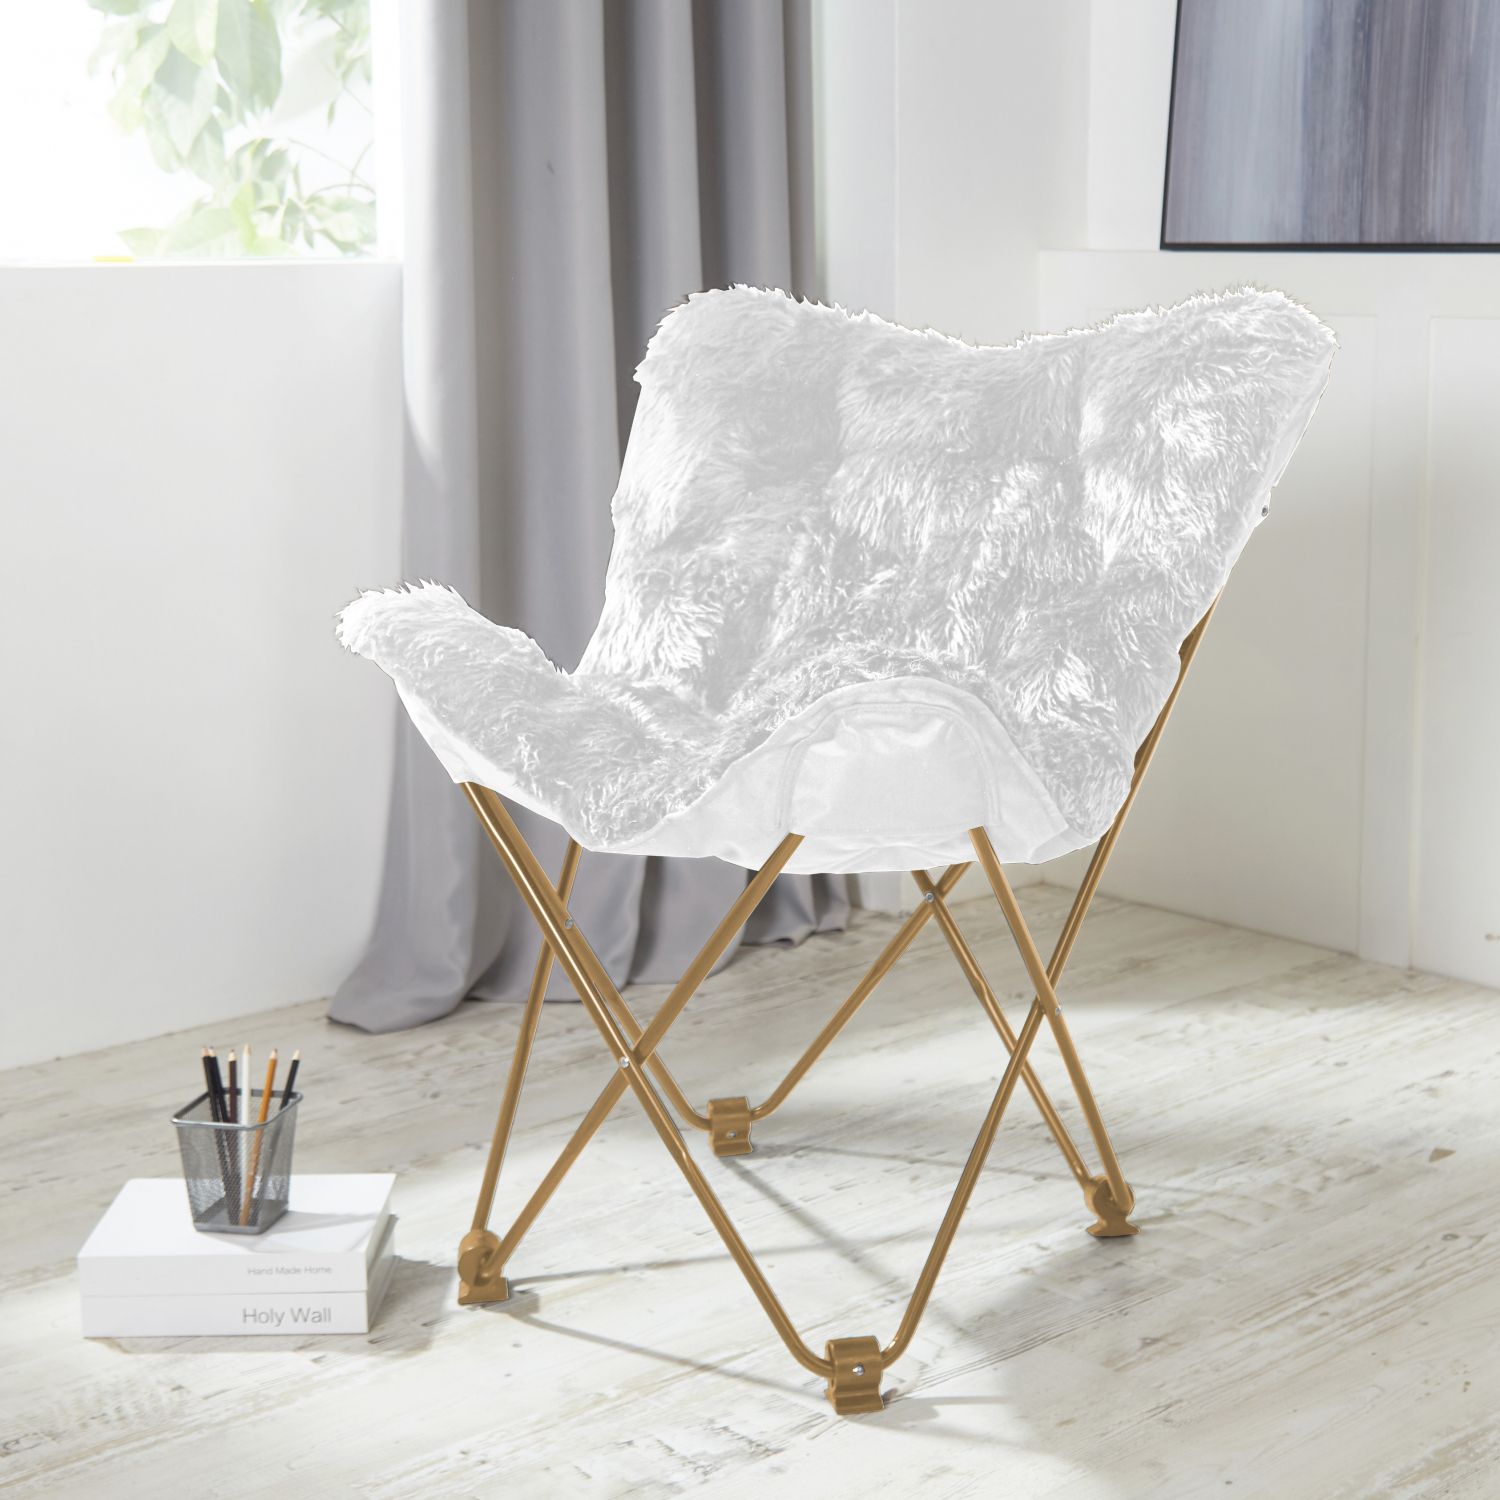 Comfy White Faux Fur Butterfly Folding Chair Seat Teen Dorm Bedroom Inside White Faux Fur Round Accent Stools With Storage (View 13 of 20)